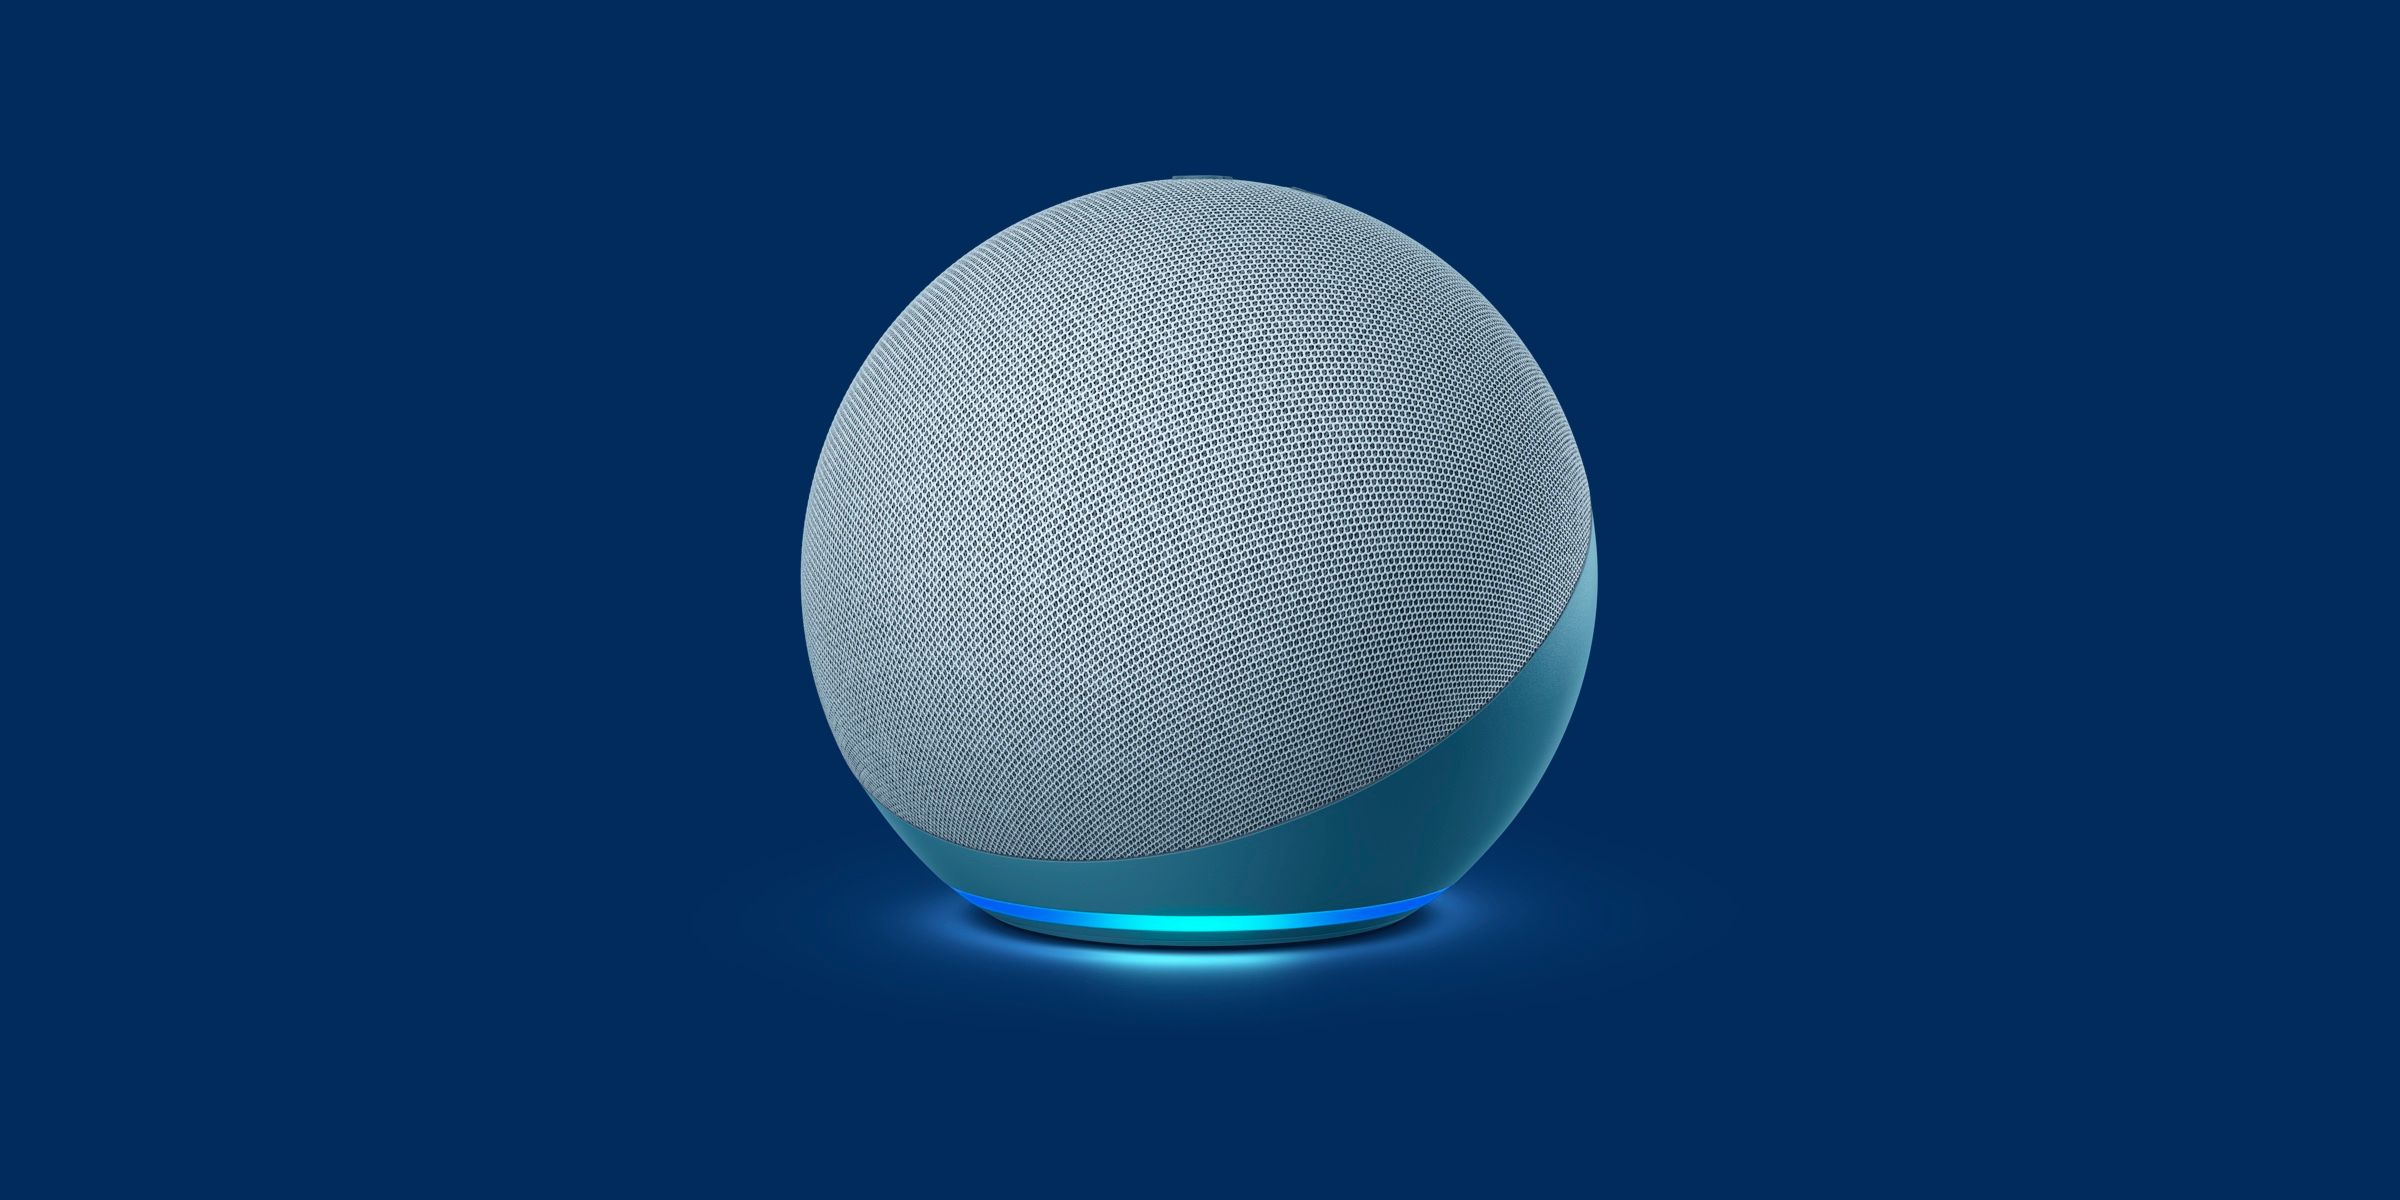 Amazon Echo Dot pictured against a navy blue background